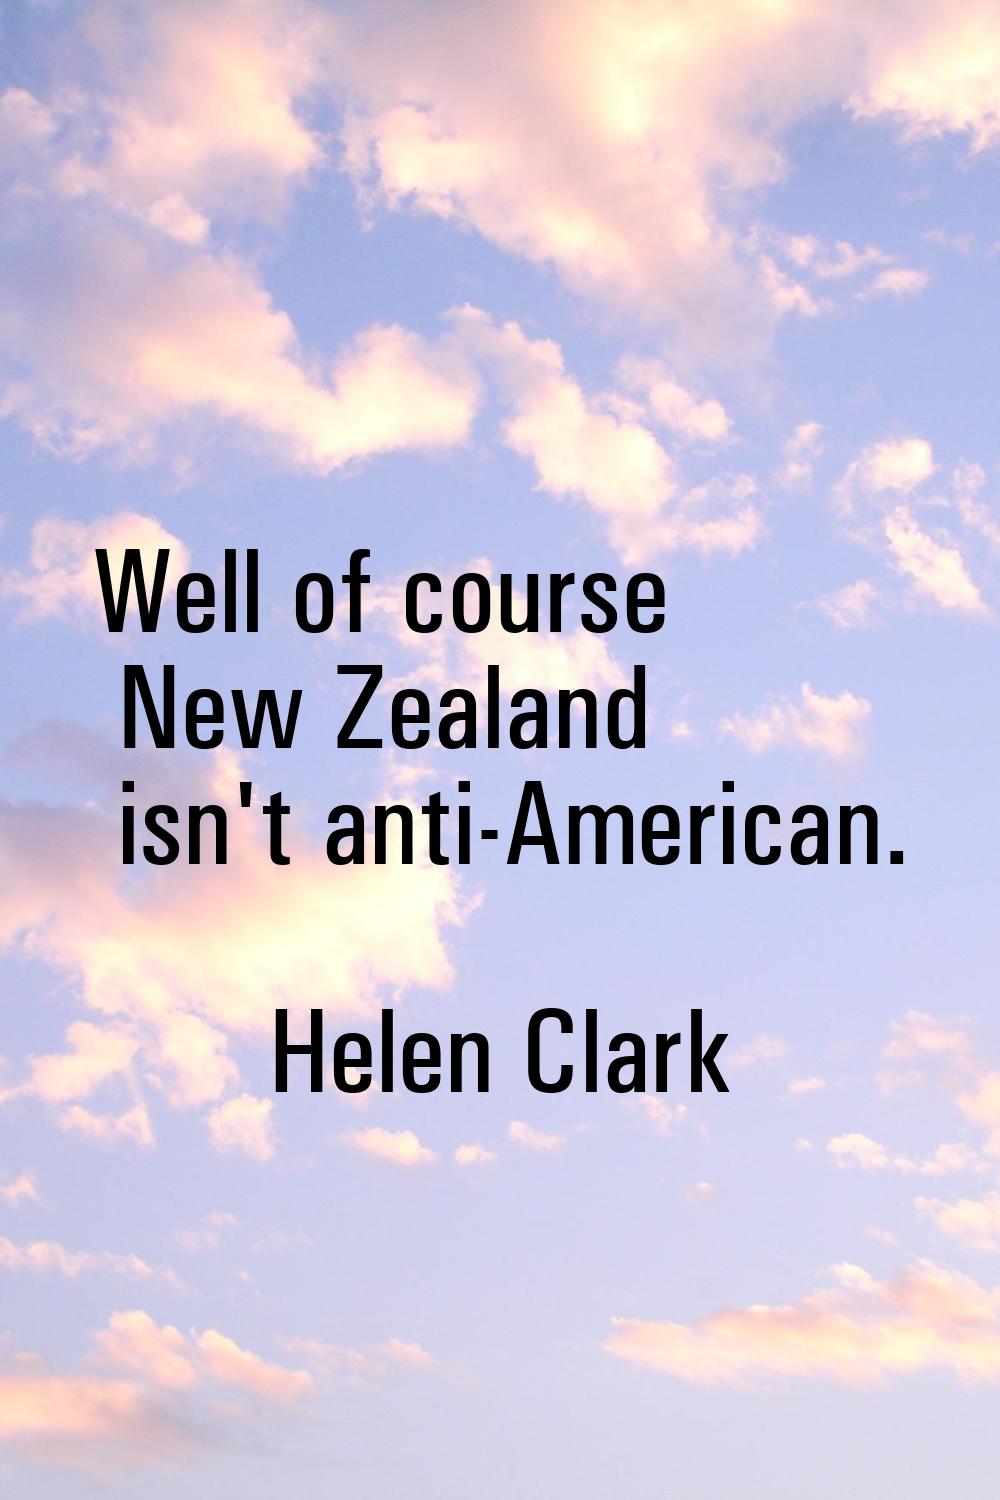 Well of course New Zealand isn't anti-American.